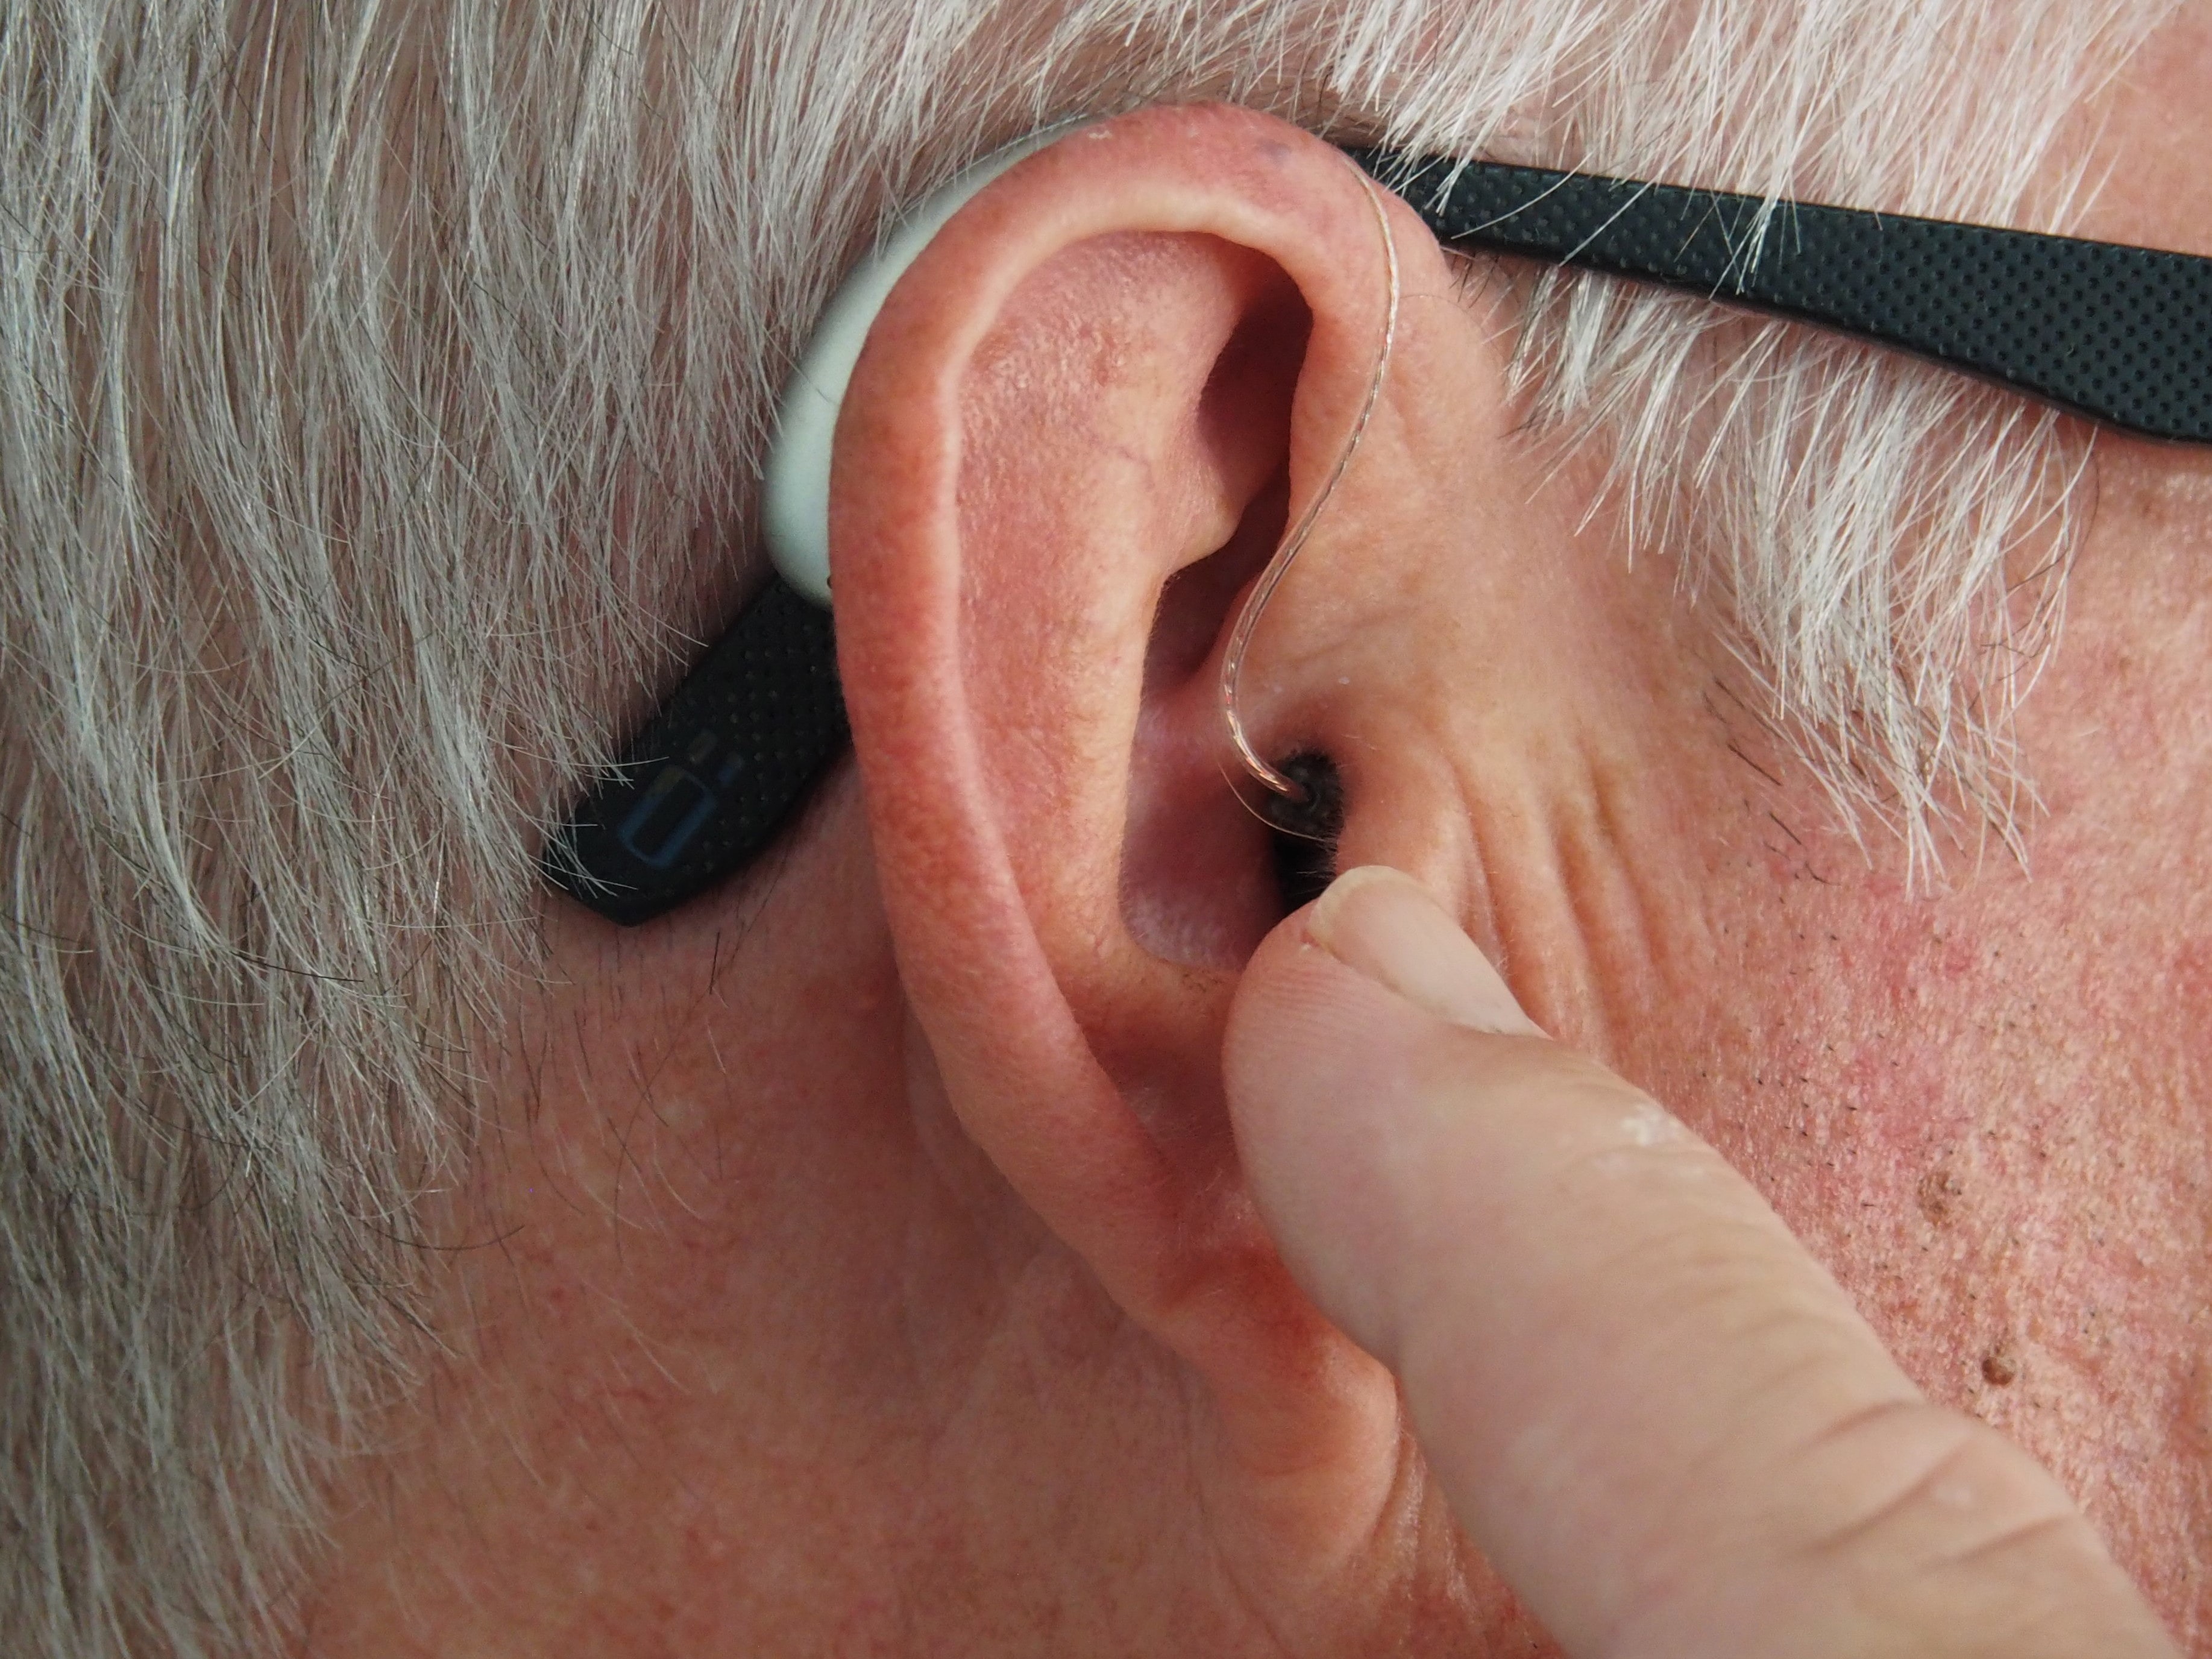 Person wearing hearing aid; image by Mark Paton, via Unsplash.com.